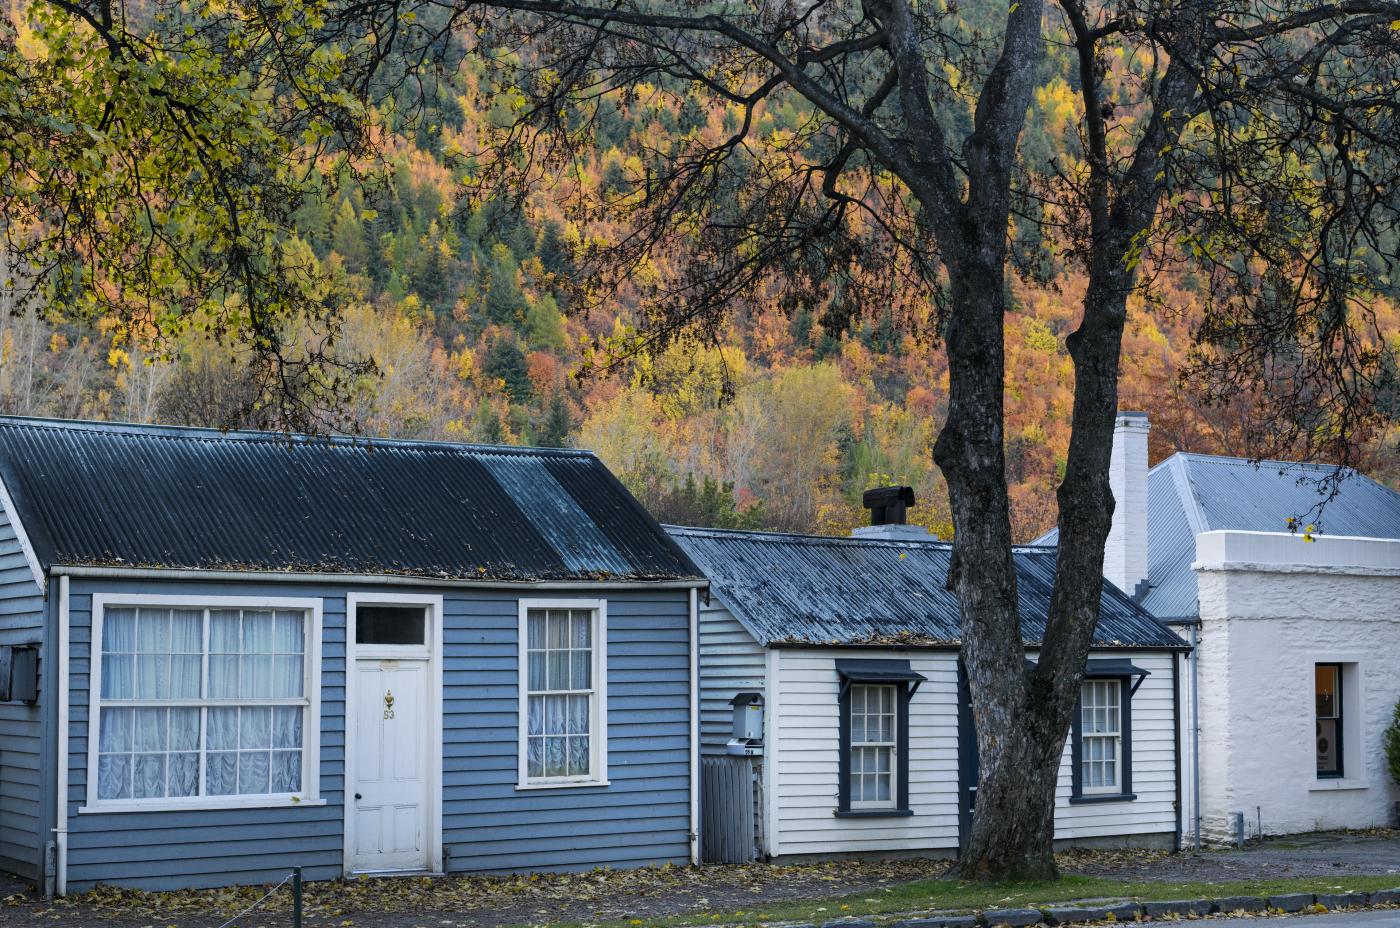 Arrowtown Miners Cottages